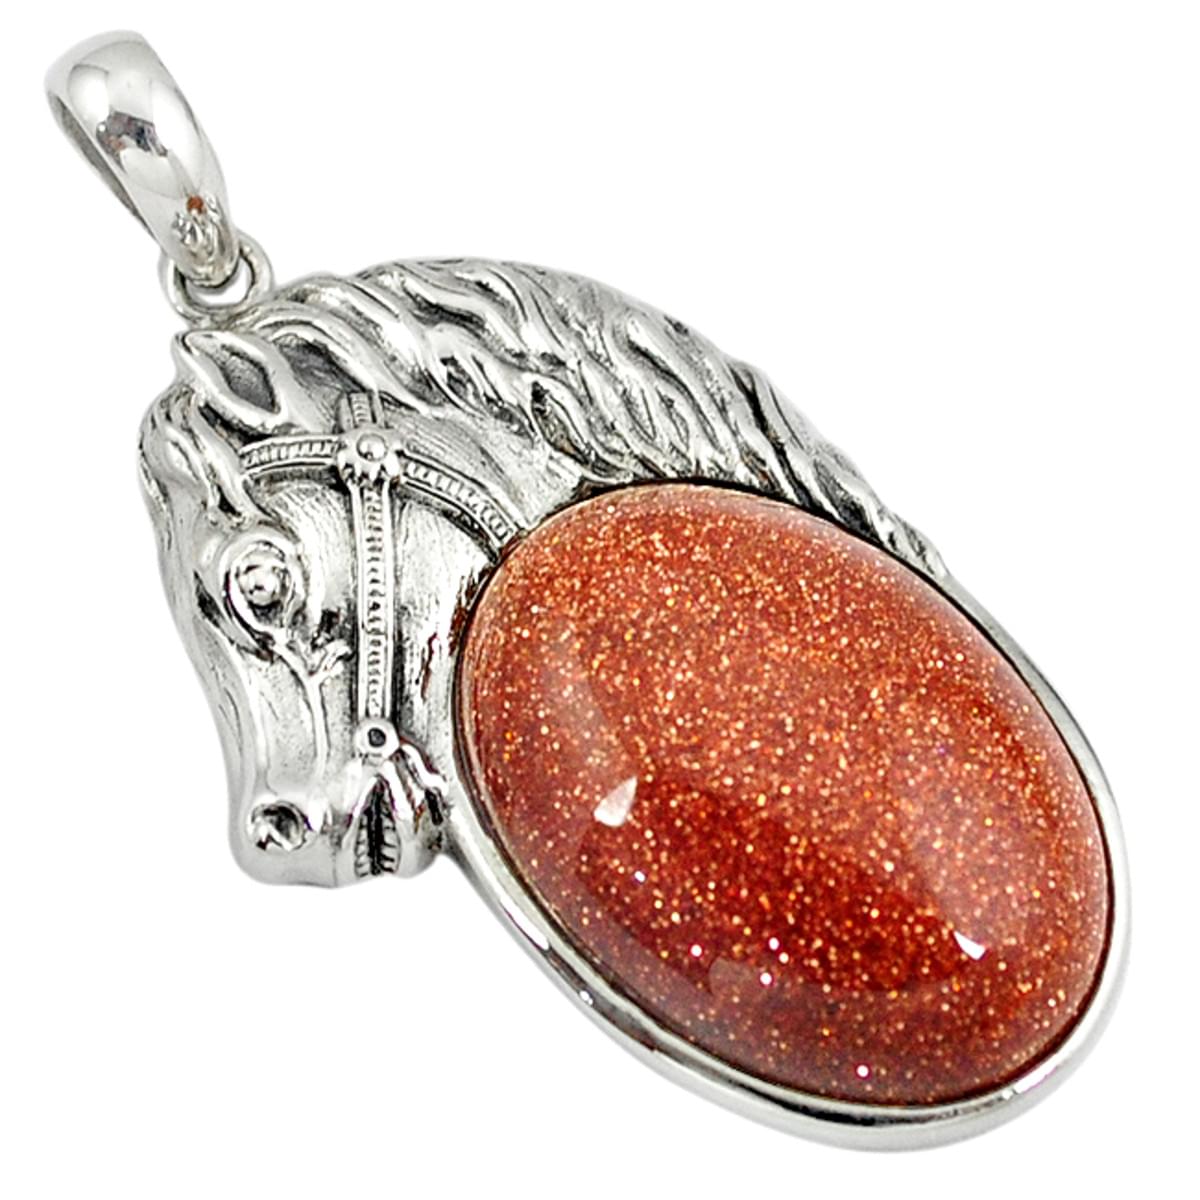 Details about   CARNELIAN COPPER TURQUOISE GEMSTONE 925 STERLING SILVER HANDMADE JEWELRY PENDANT